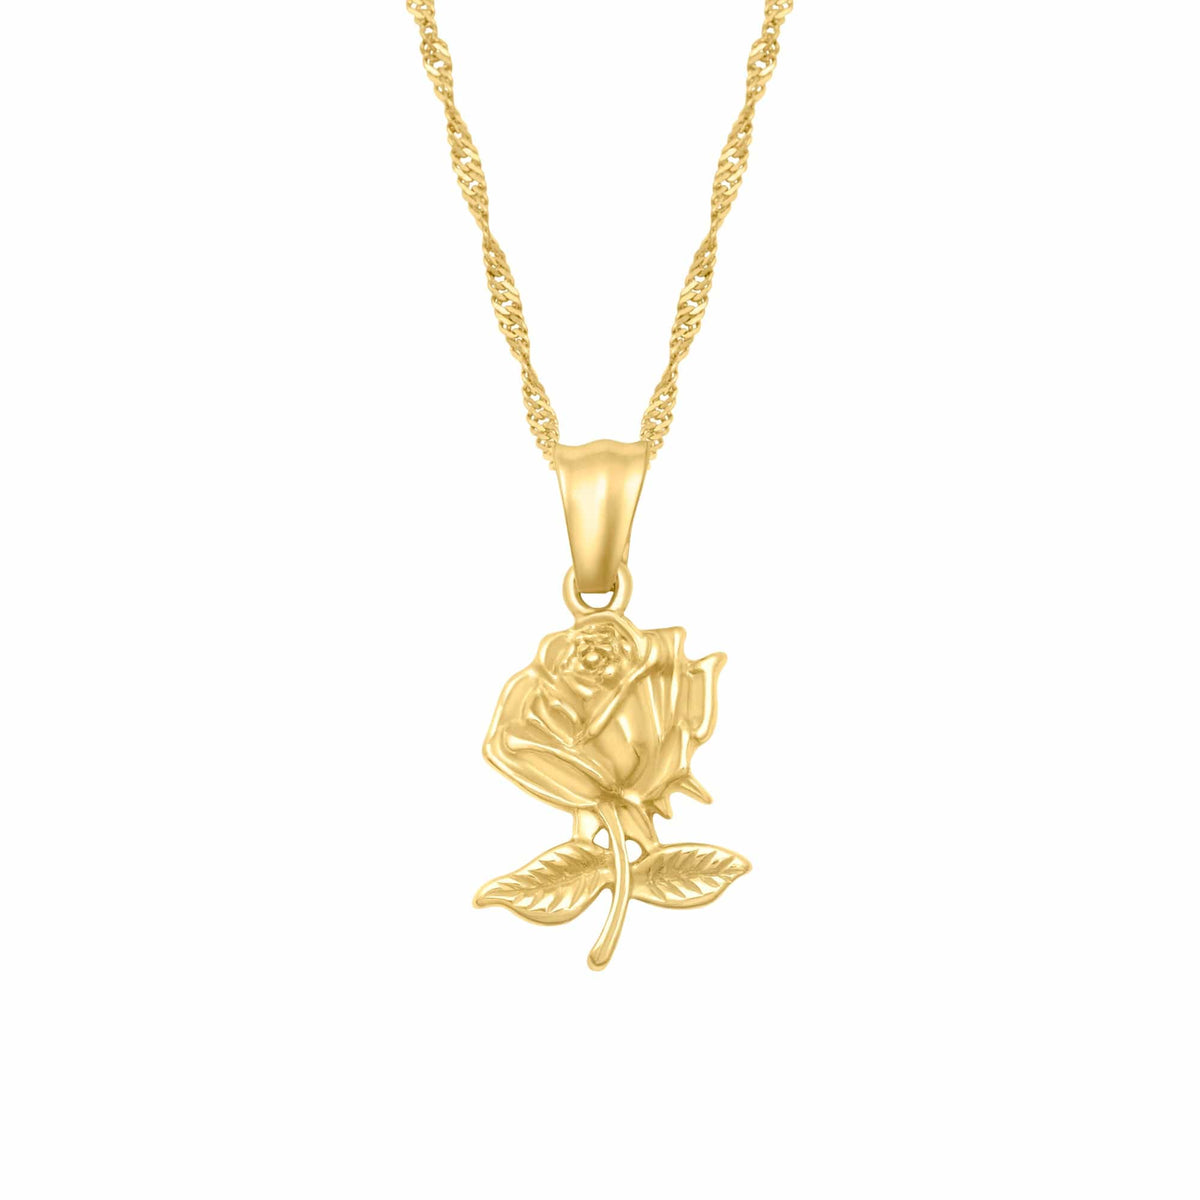 BohoMoon Stainless Steel Swoon Rose Necklace Gold